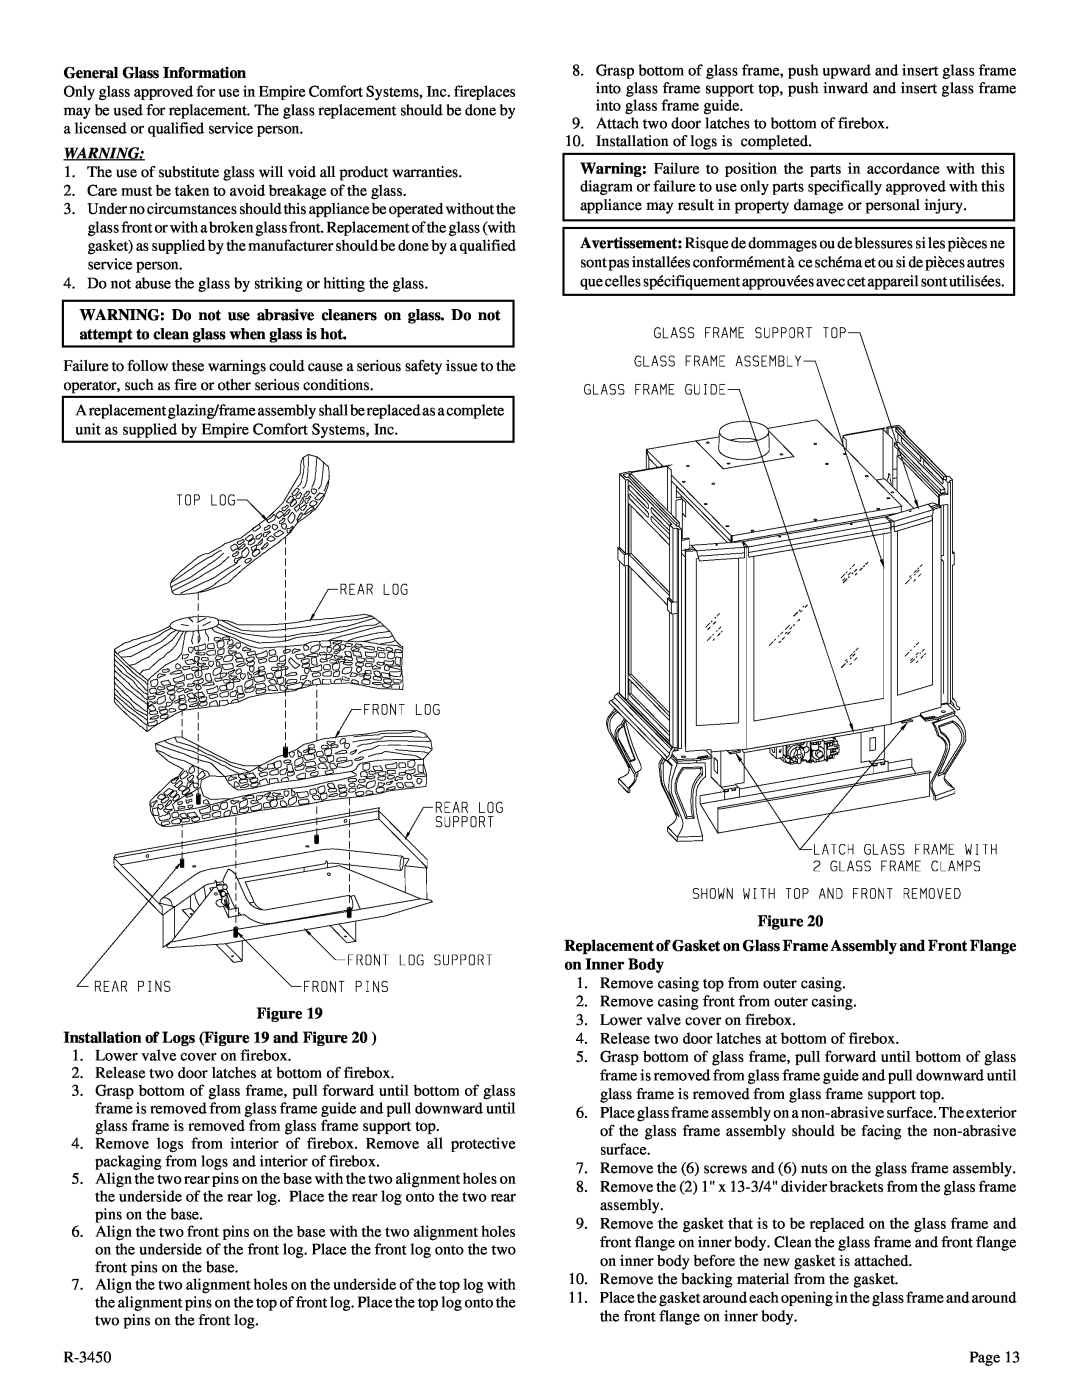 Empire Comfort Systems CIBV-30-2 General Glass Information, Figure Installation of Logs and Figure 